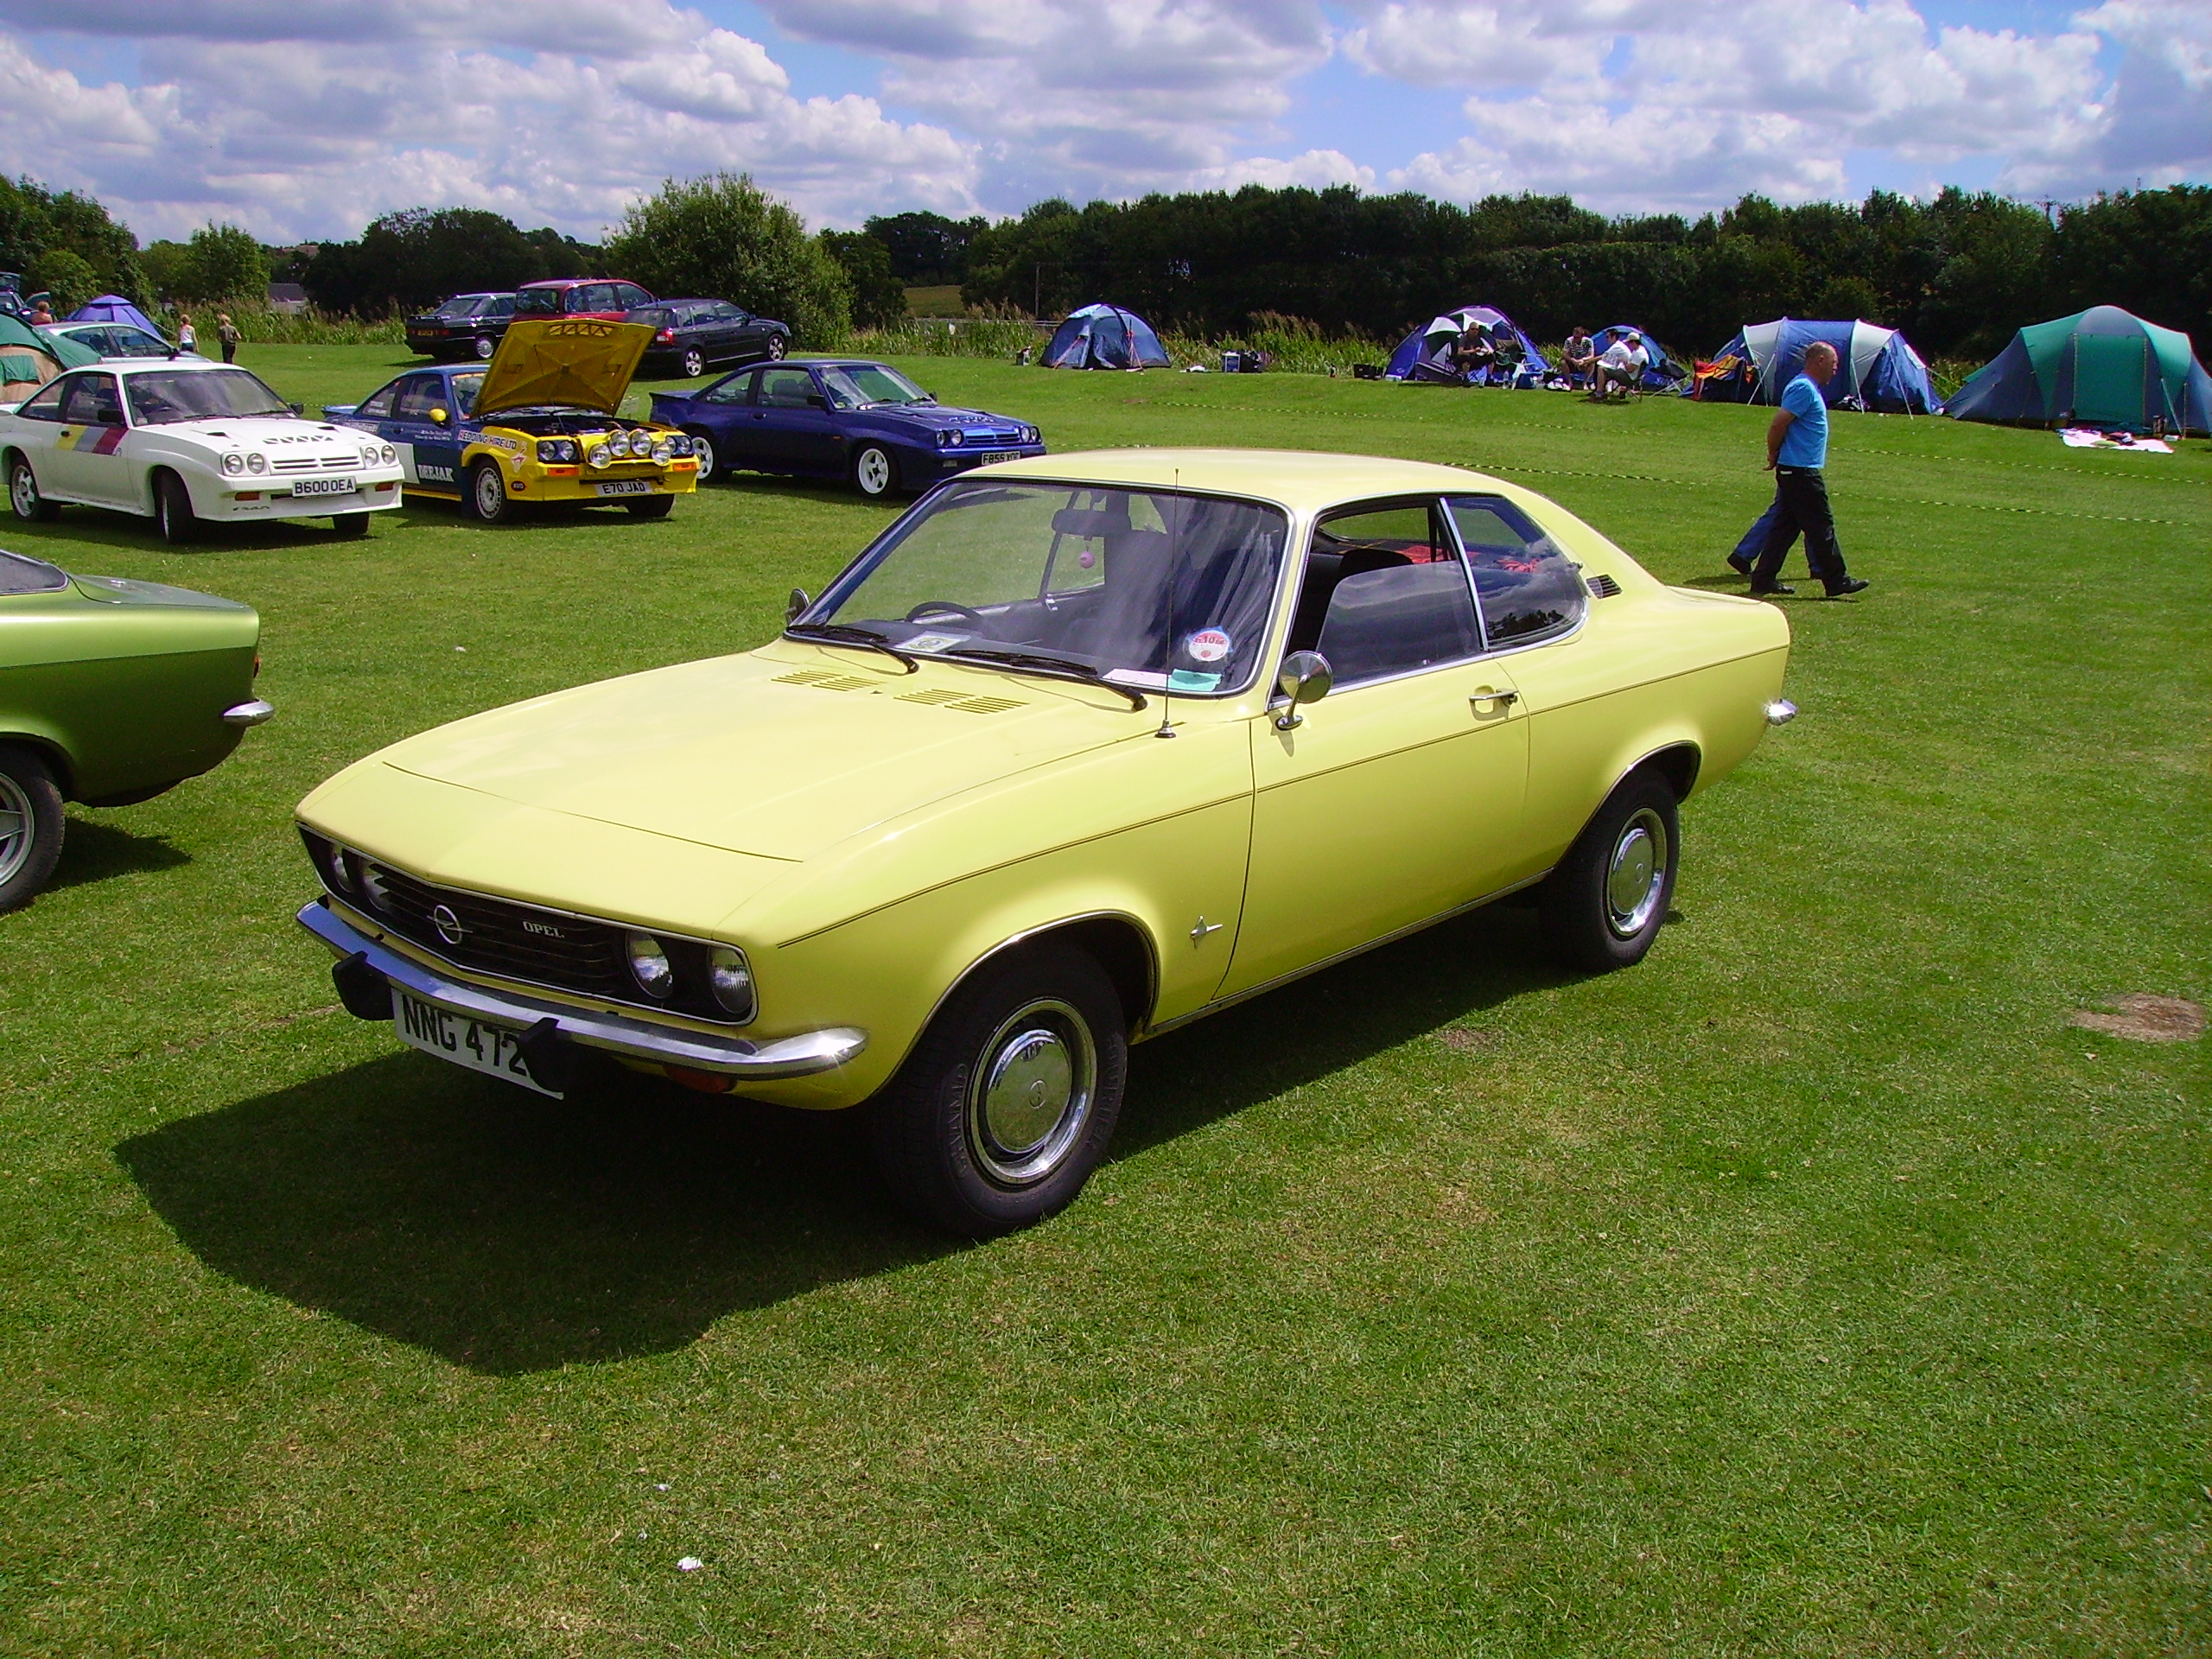 Opel Manta A 1970-1975. F/R. The Manta A was released in 1970,